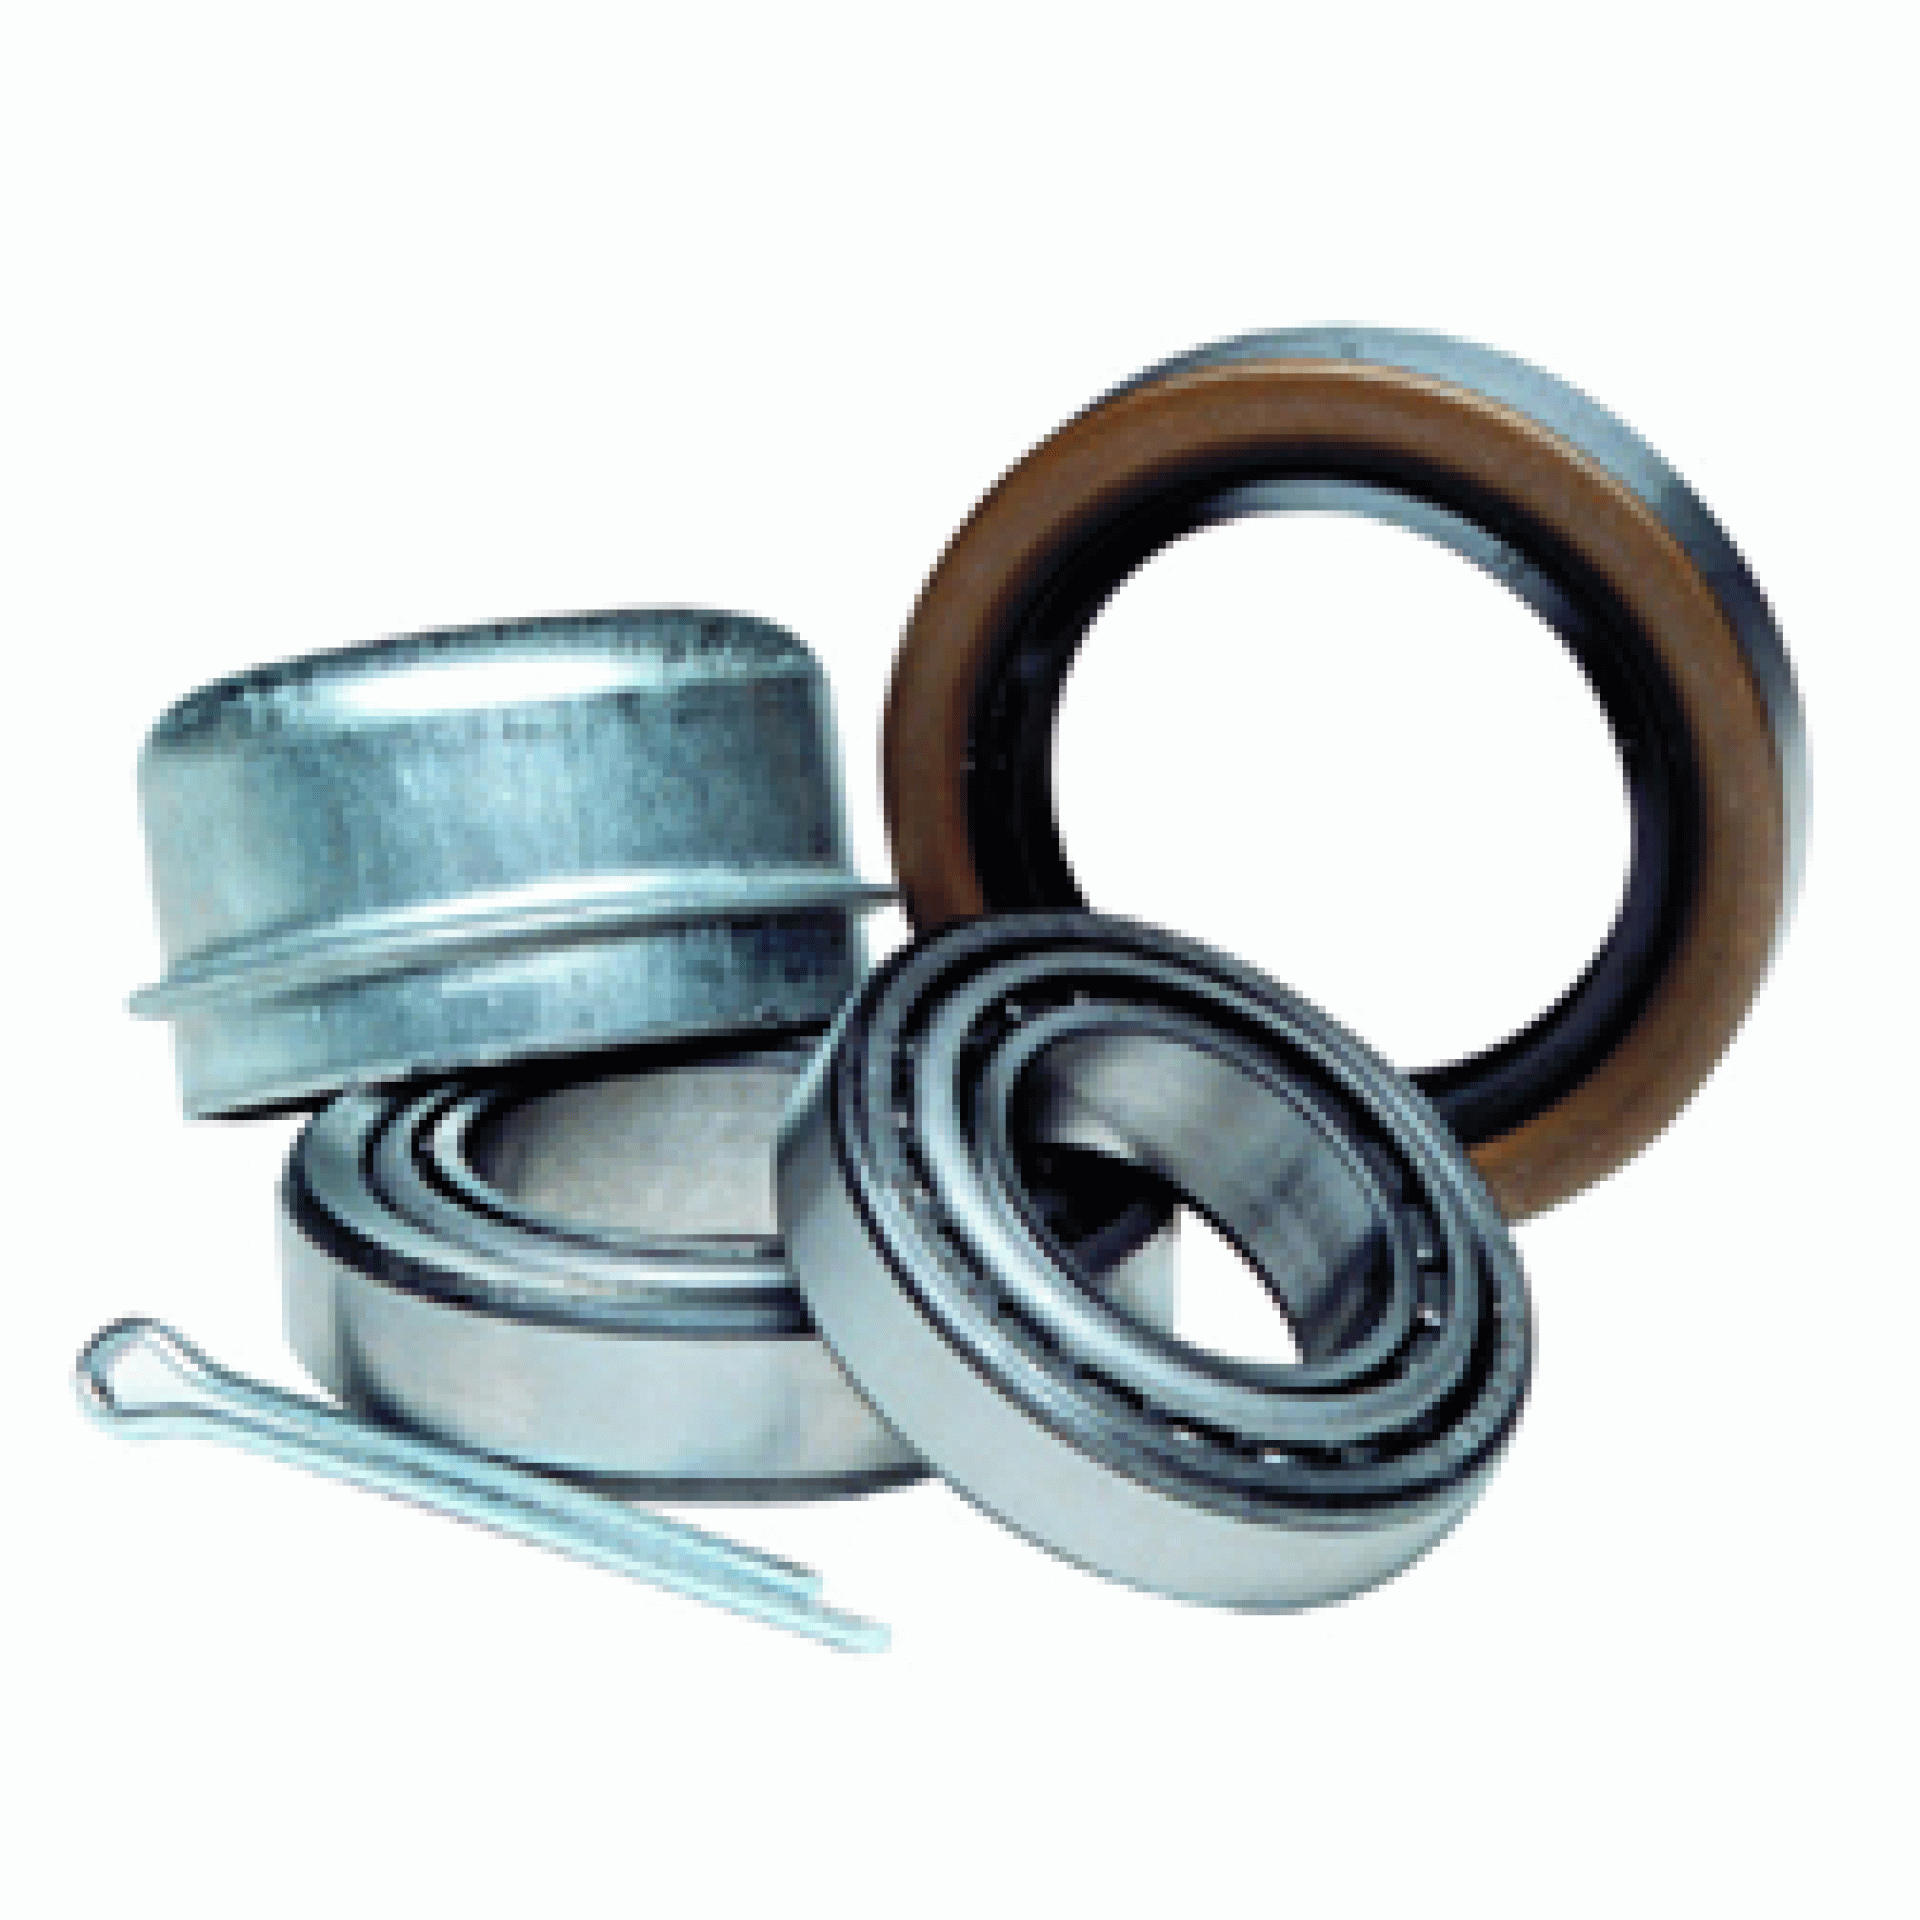 DEXTER MARINE PRODUCTS OF GEORGIA LC | K71-G02-34 | BEARING KIT- 1-1/16" STRAIGHT SPINDLE W/ DUST CAP L44649 CONE L44610 CUP